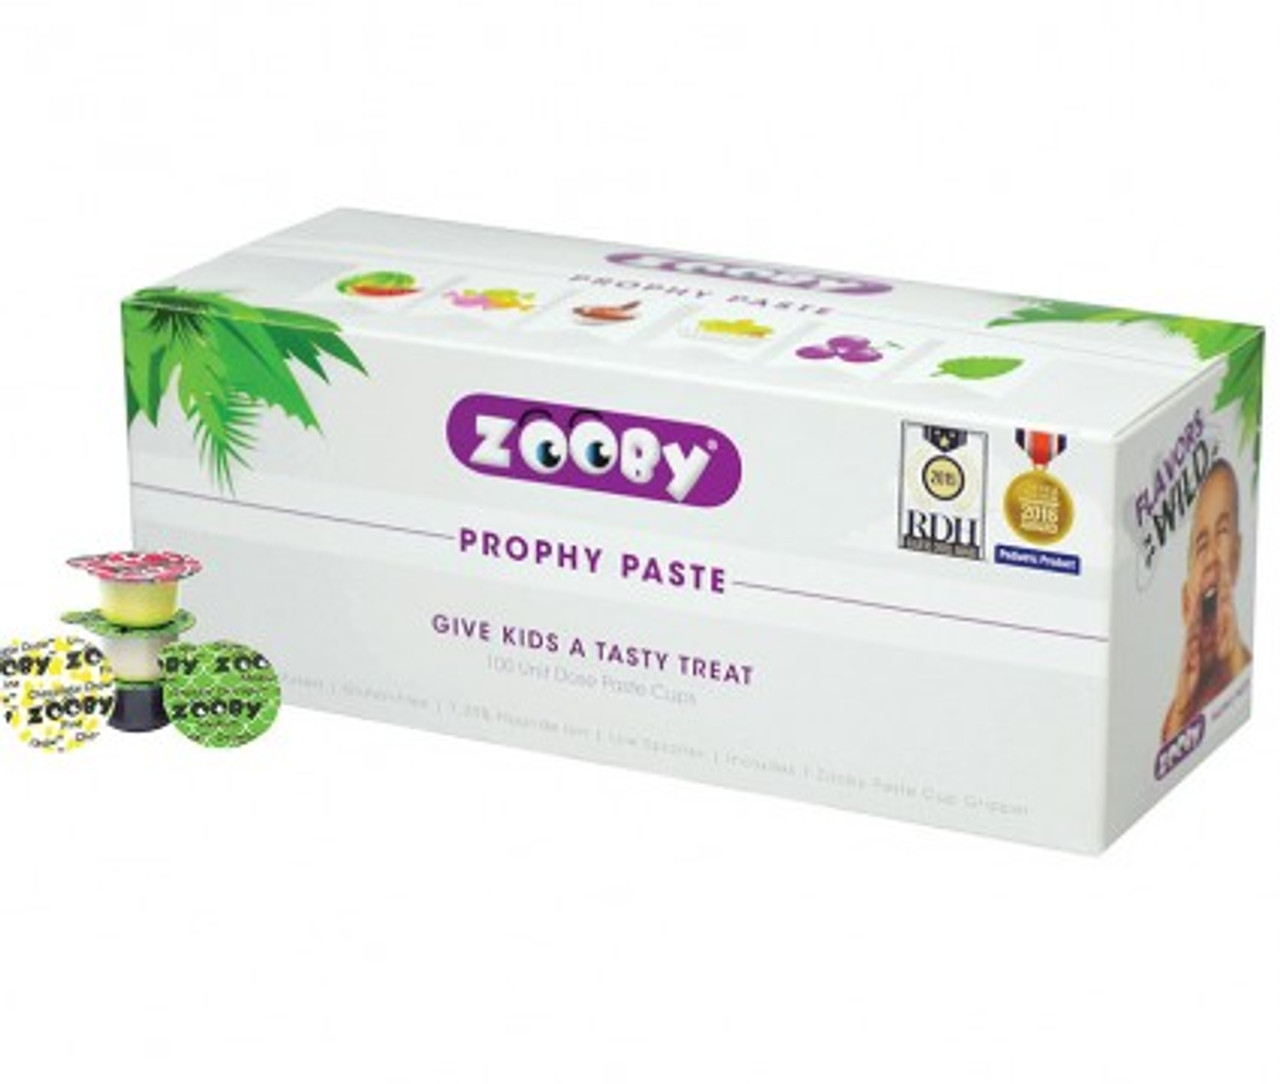 Zooby Prophy Paste Animal Pack Assortment Fine 100/bx